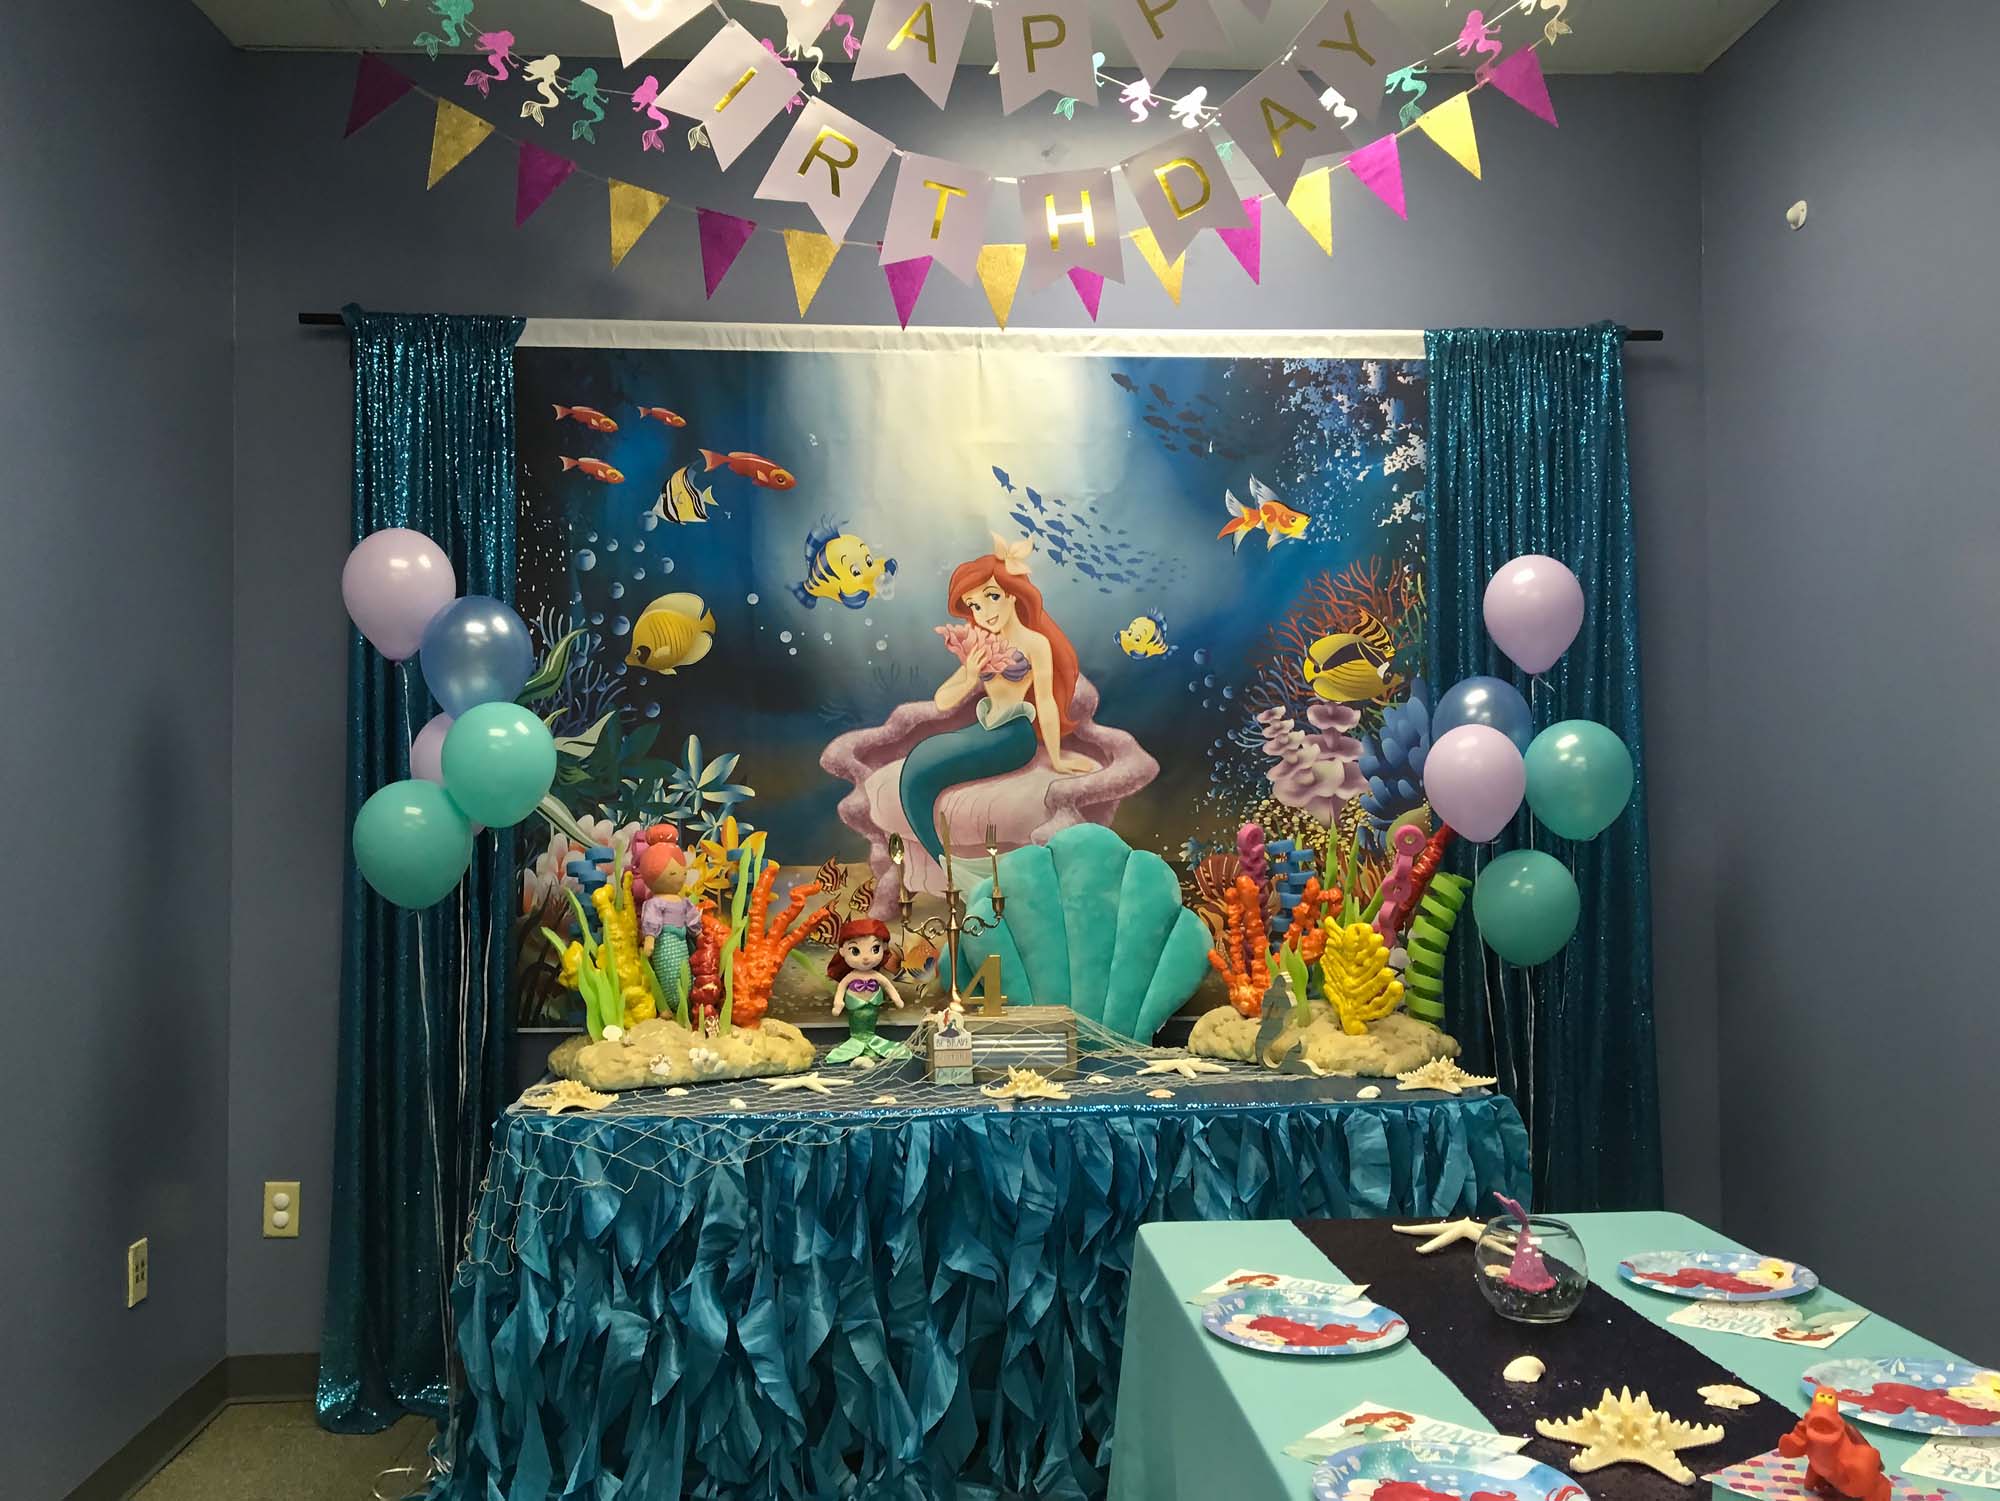 Mermaid Birthday Party For 4 Year Old Girl Held at Orlando Indoor